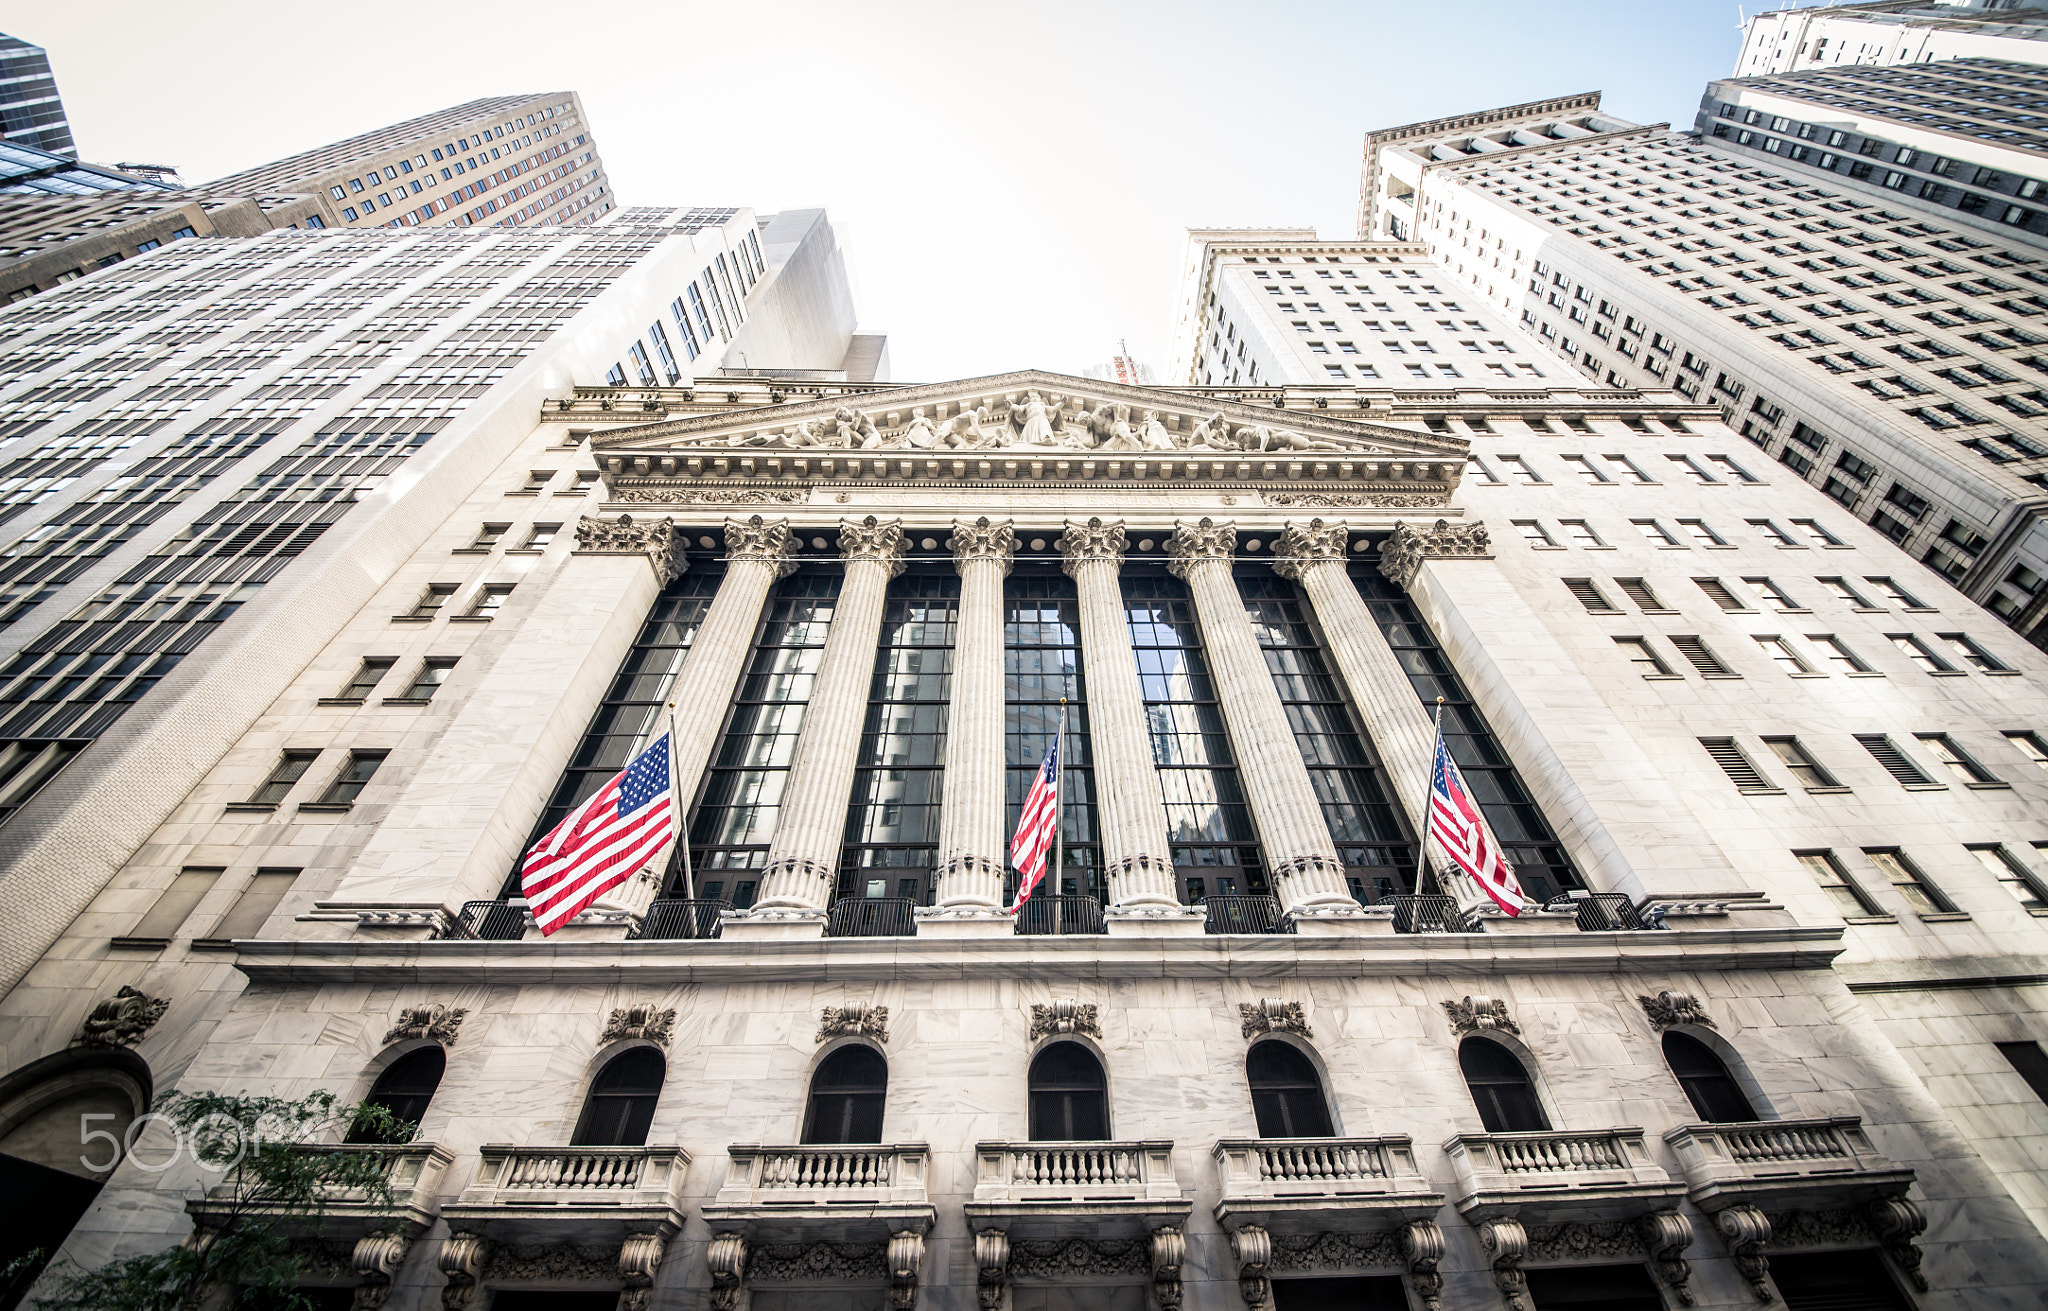 NEW YORK CITY, NY ,SEPTEMBER 17, 2015: The main building of New York Stock Exchange and a part of...